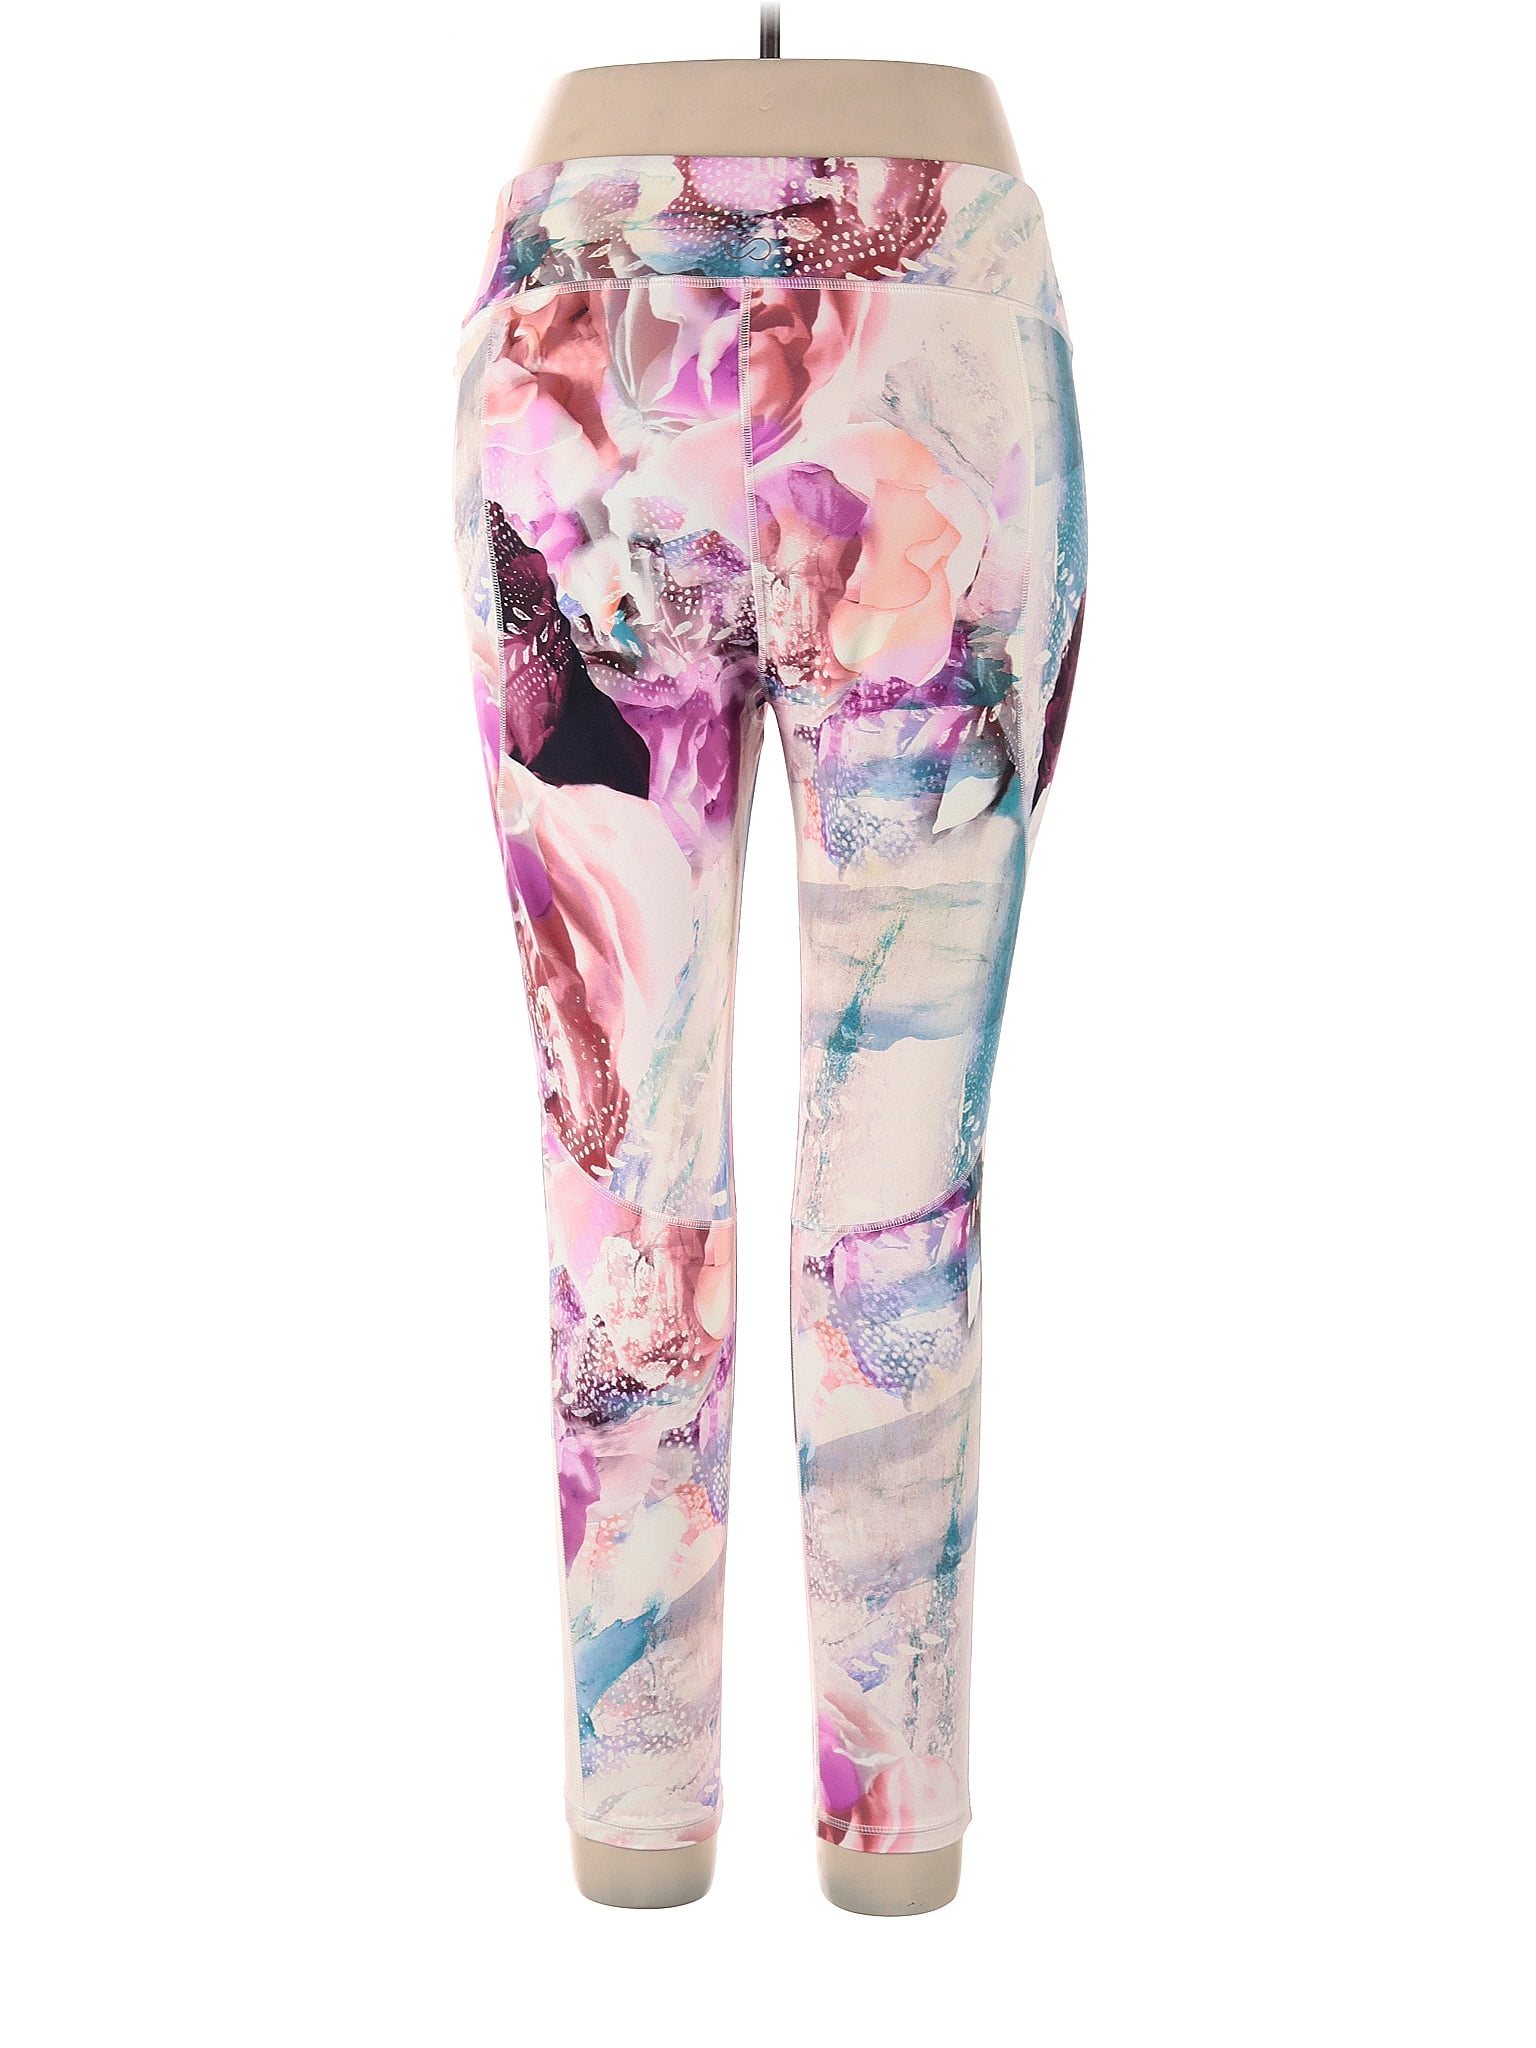 Calia by Carrie Underwood Floral Multi Color Pink Leggings Size XL